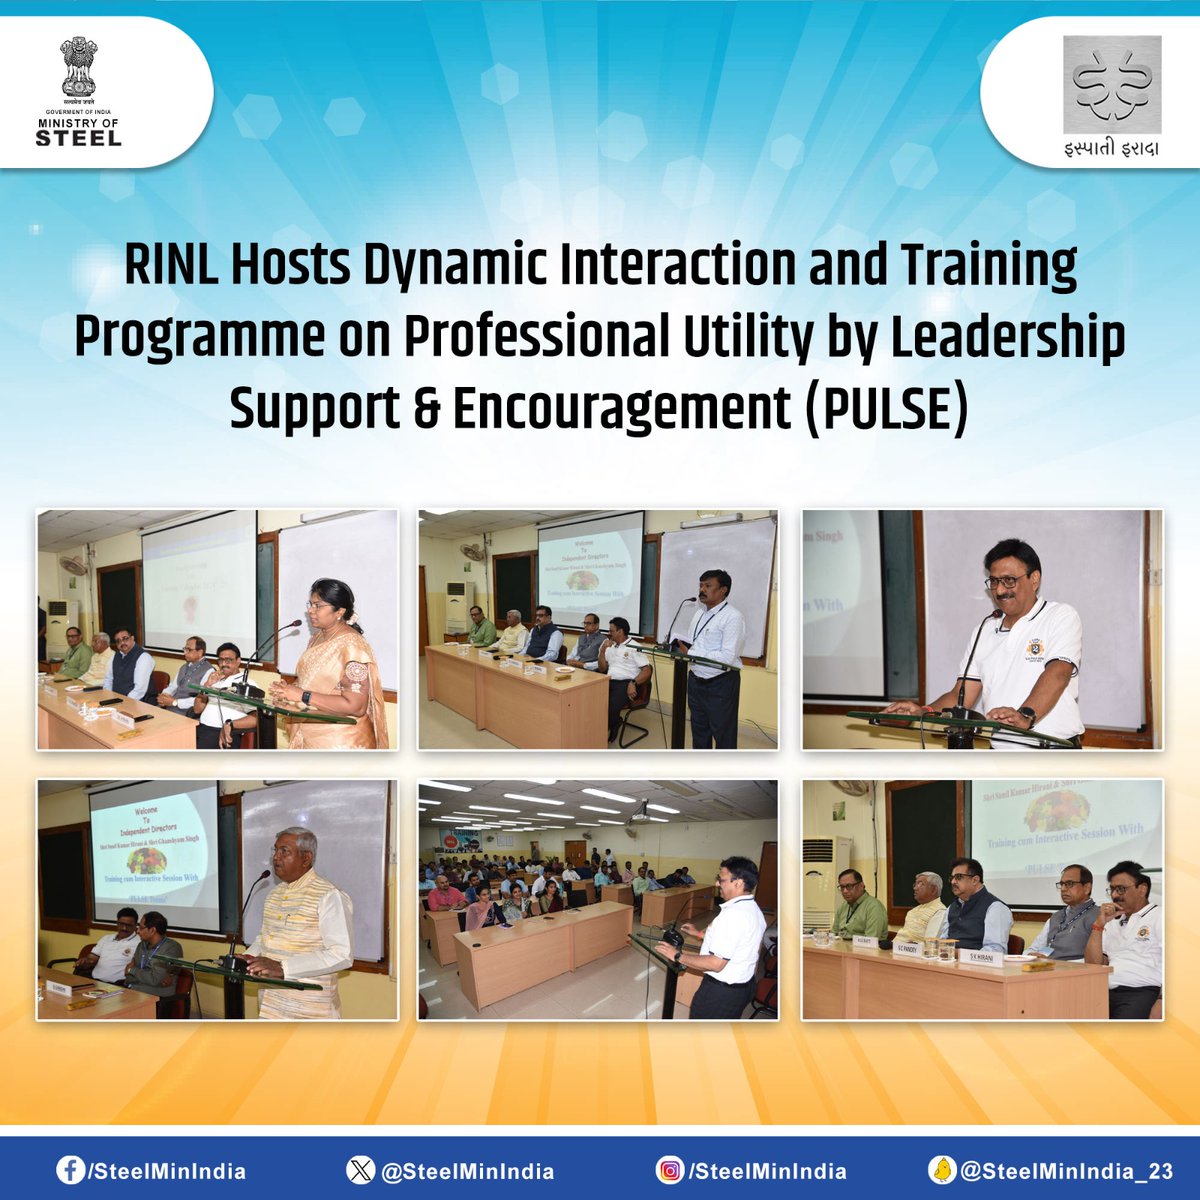 Empowering Leadership through #PULSE! #RINL's Management Services Department organizes an Interactive Training Program, emphasizing Professional Utility by Leadership Support & Encouragement (PULSE). #LeadershipDevelopment #TrainingProgramme